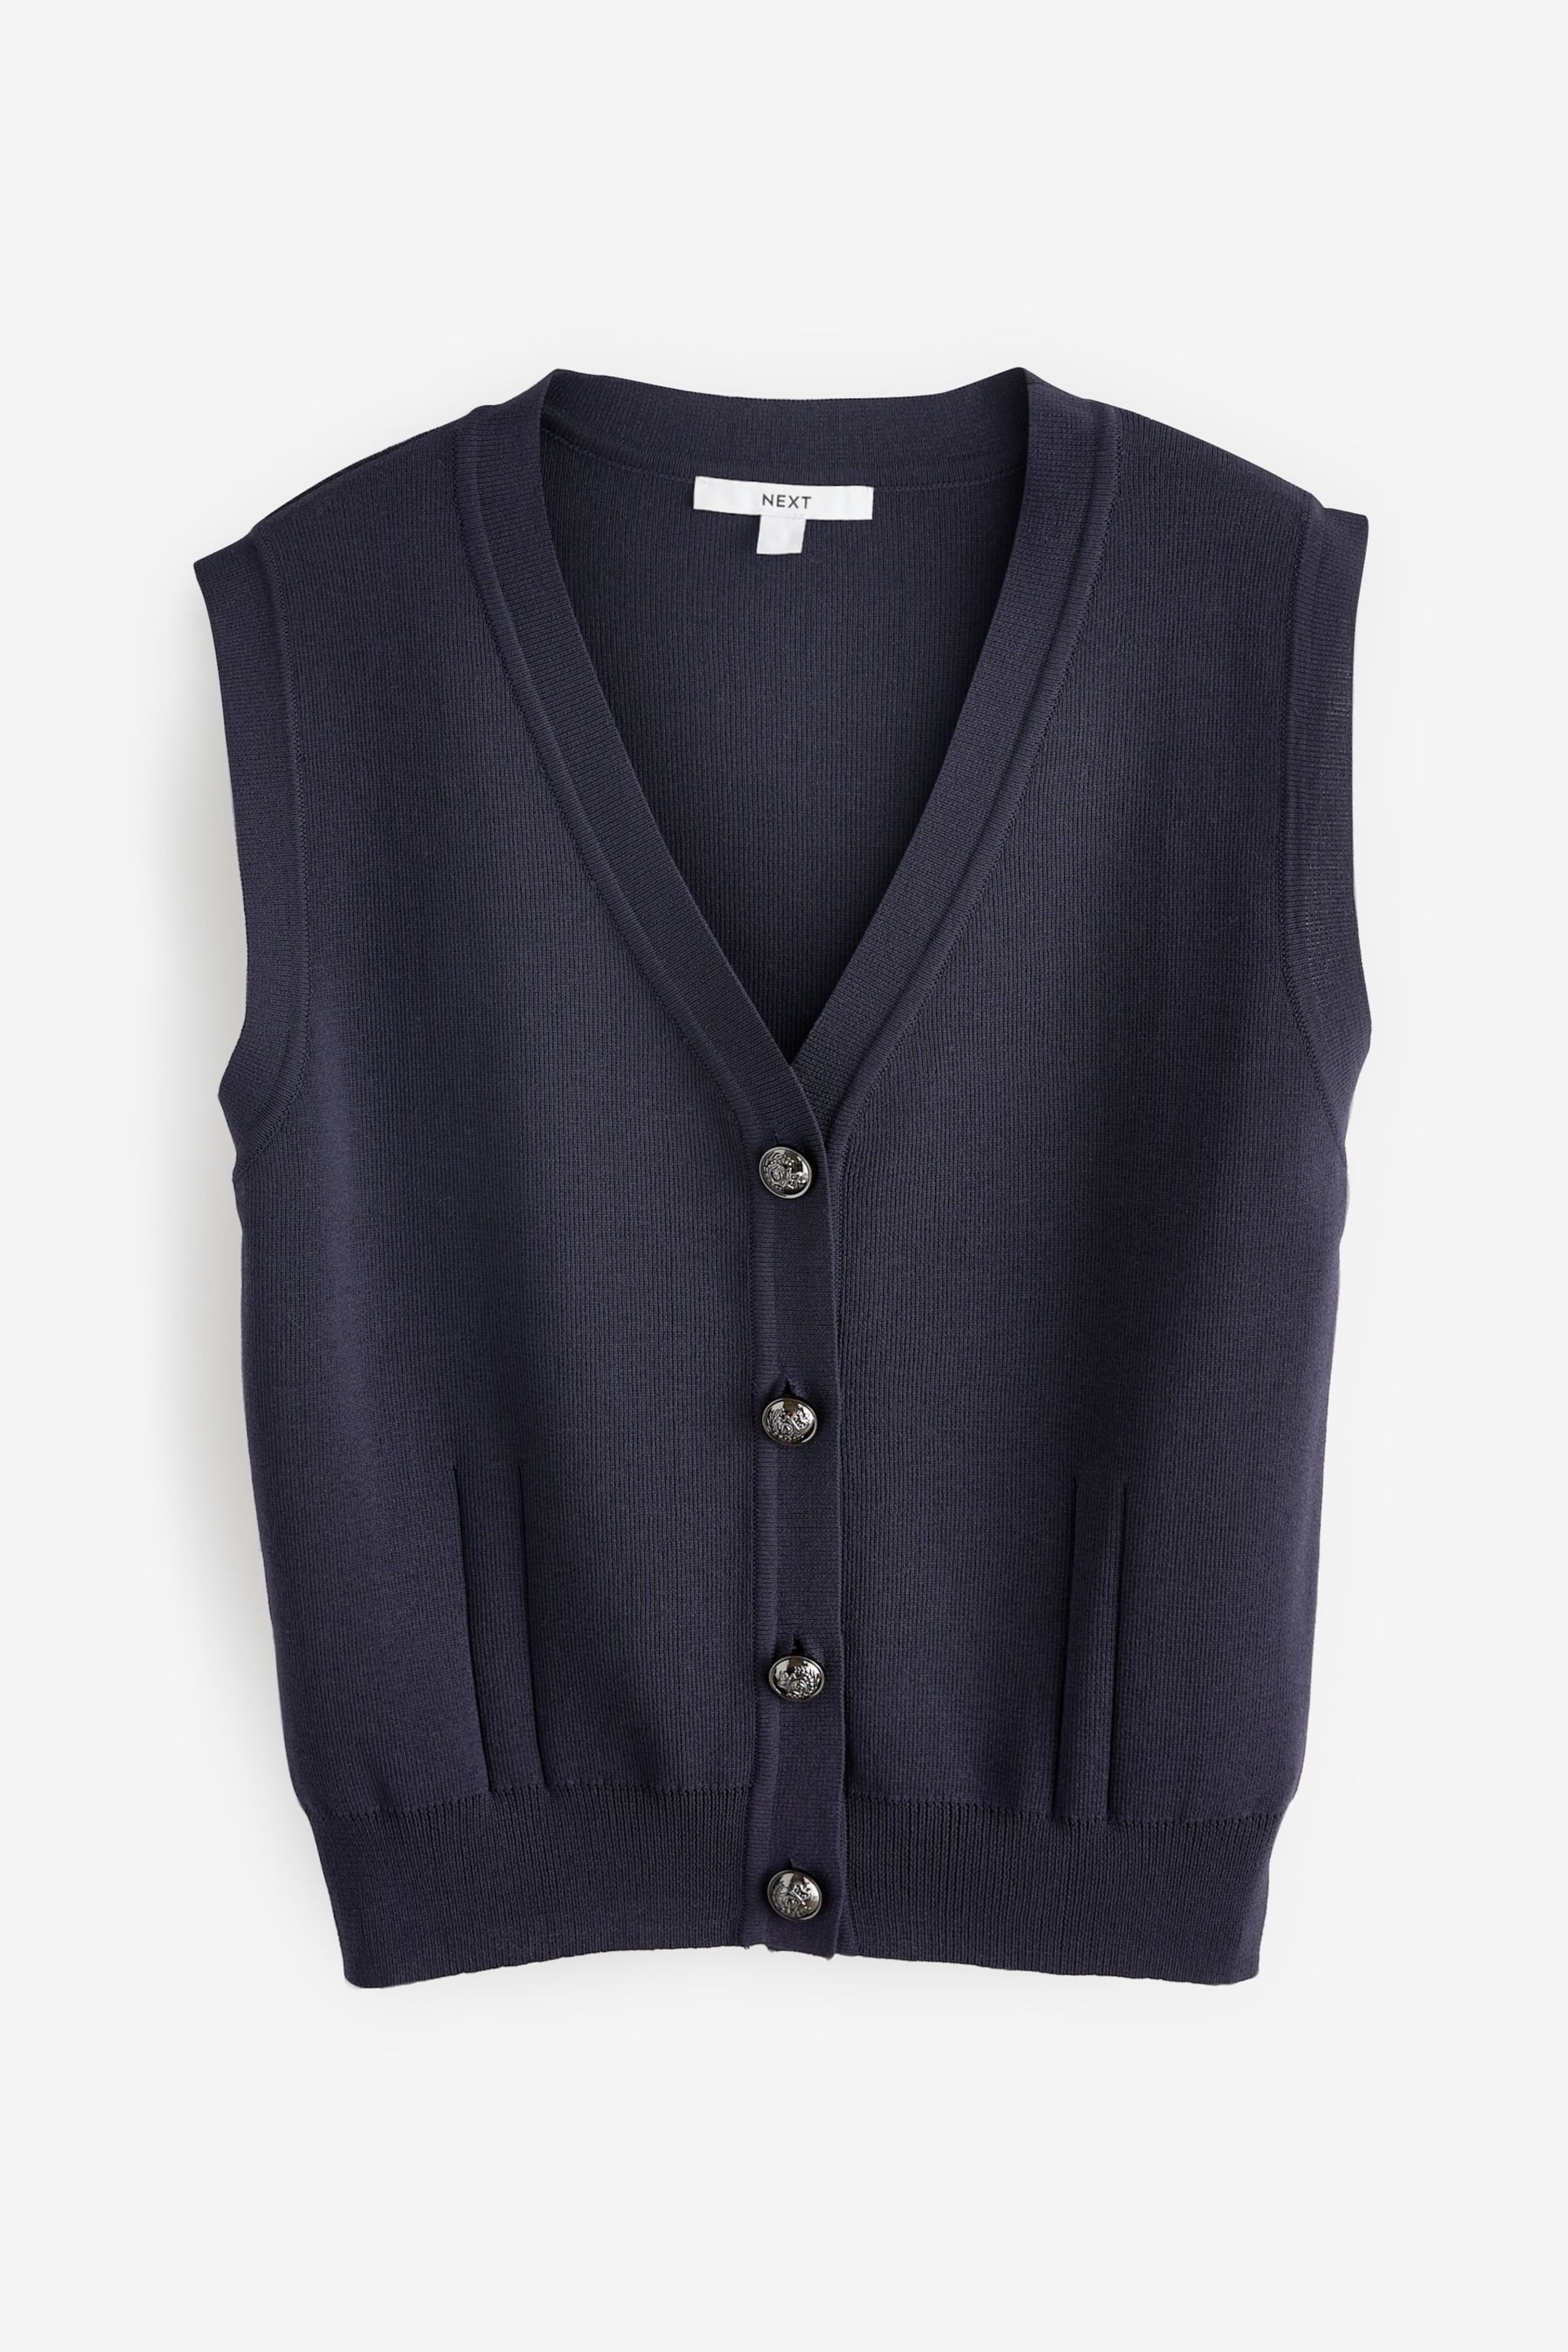 Navy Blue Button Up Waistcoat - Image 5 of 6